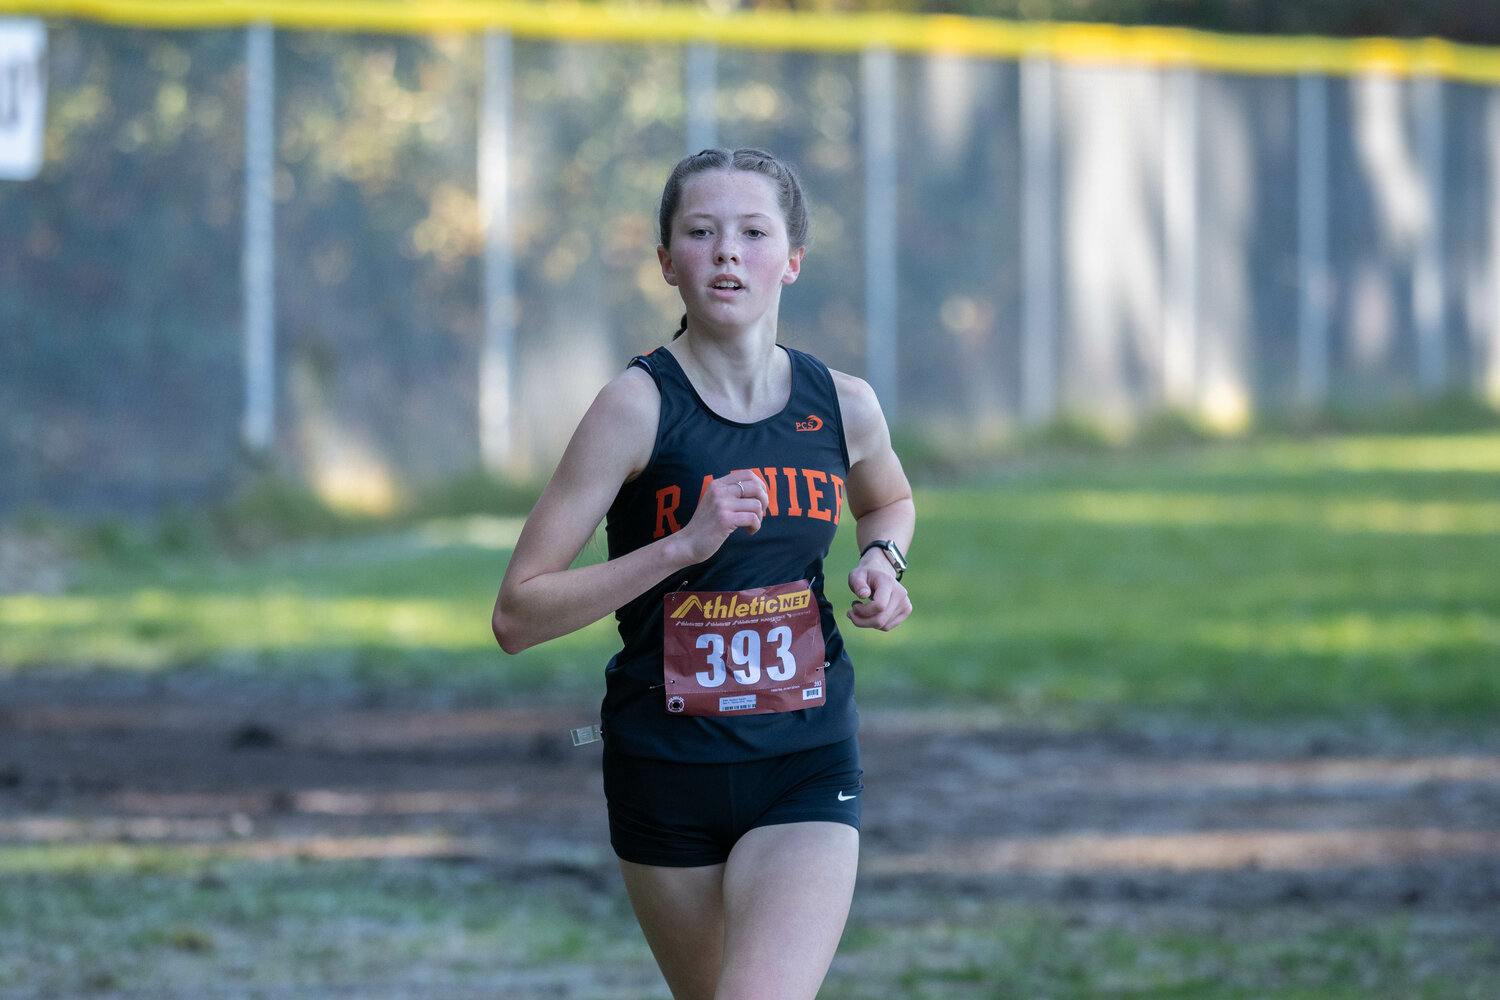 Madison Ingram crosses the finish line to take first in the girls' race at the 1B/2B District 4 cross country championship meet on Oct. 28 in Rainier.